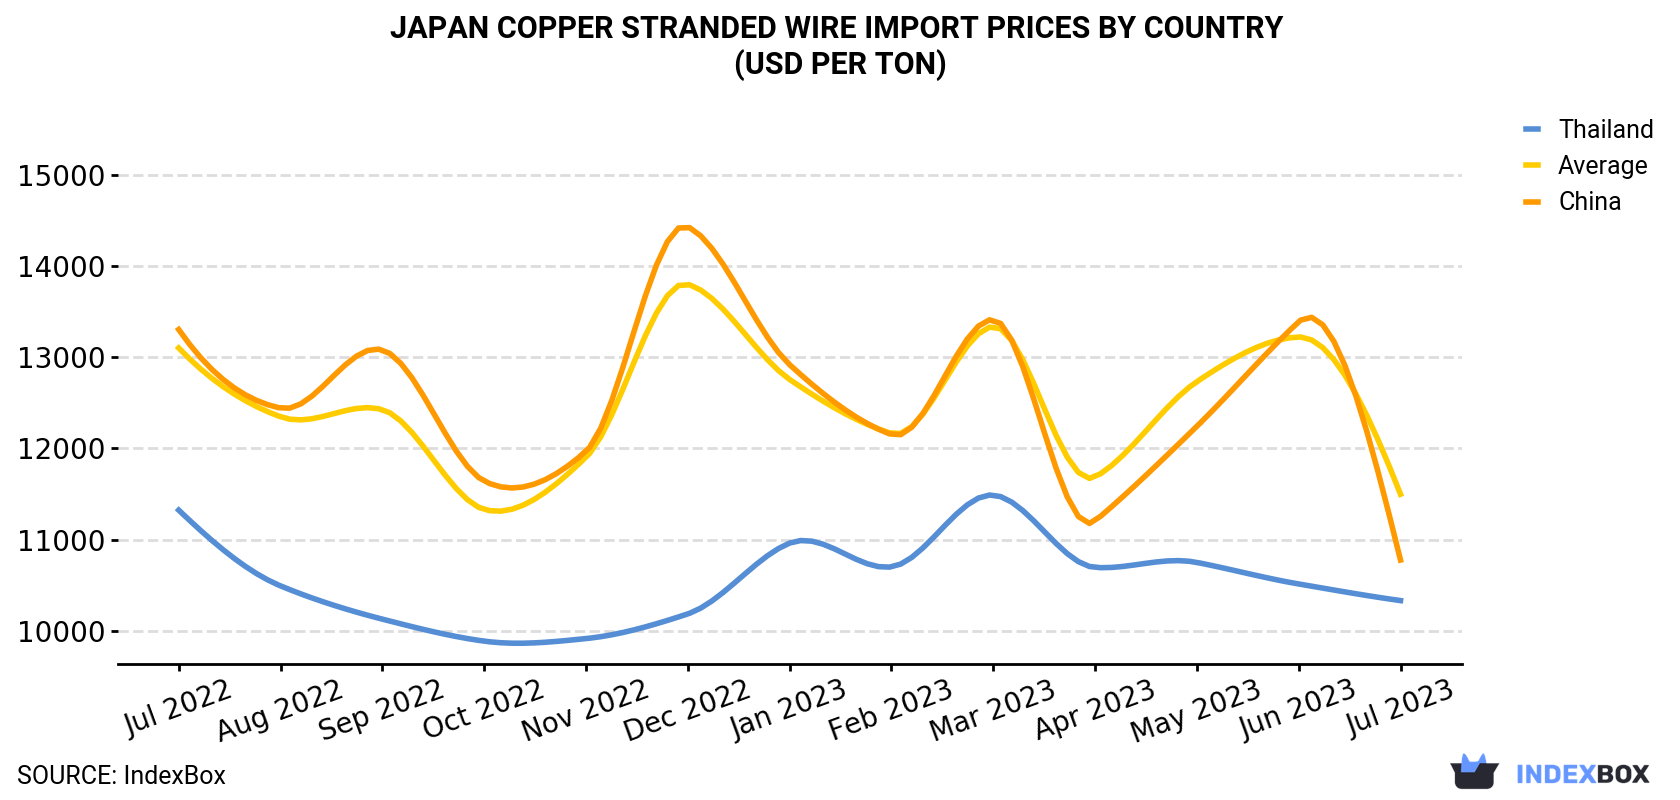 Japan Copper Stranded Wire Import Prices By Country (USD Per Ton)